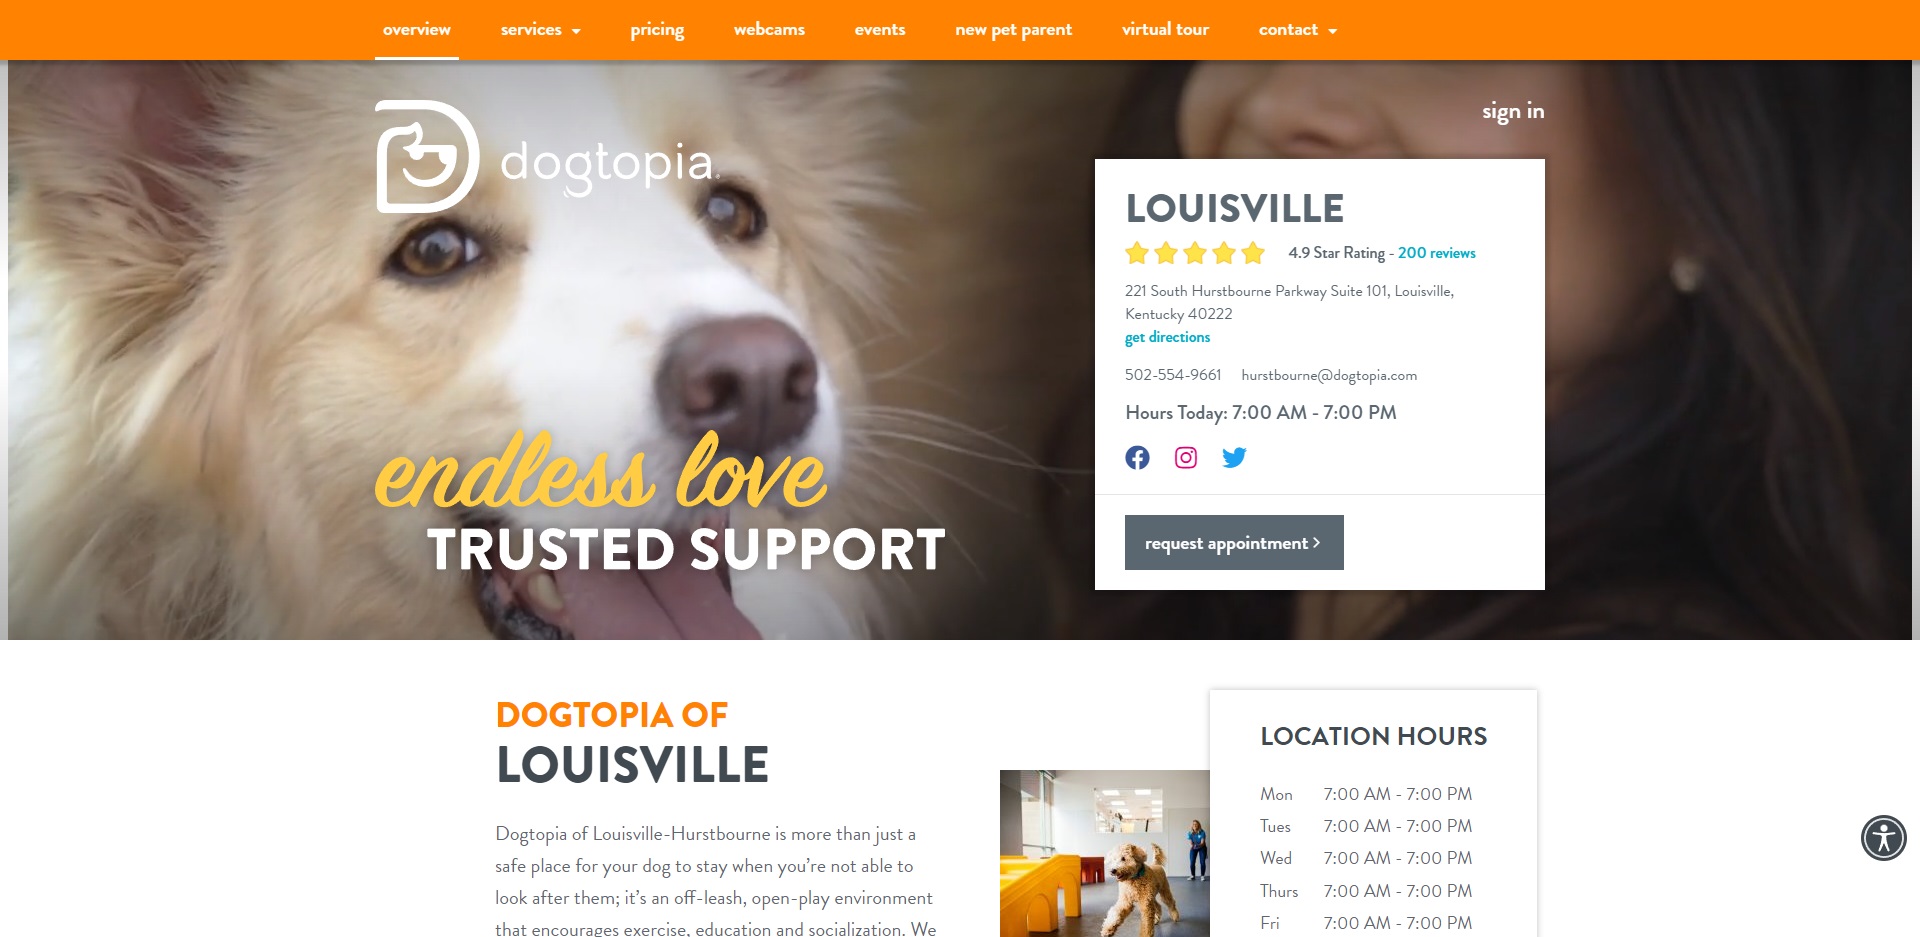 5 Best Doggy Day Care Centres in Louisville, KY